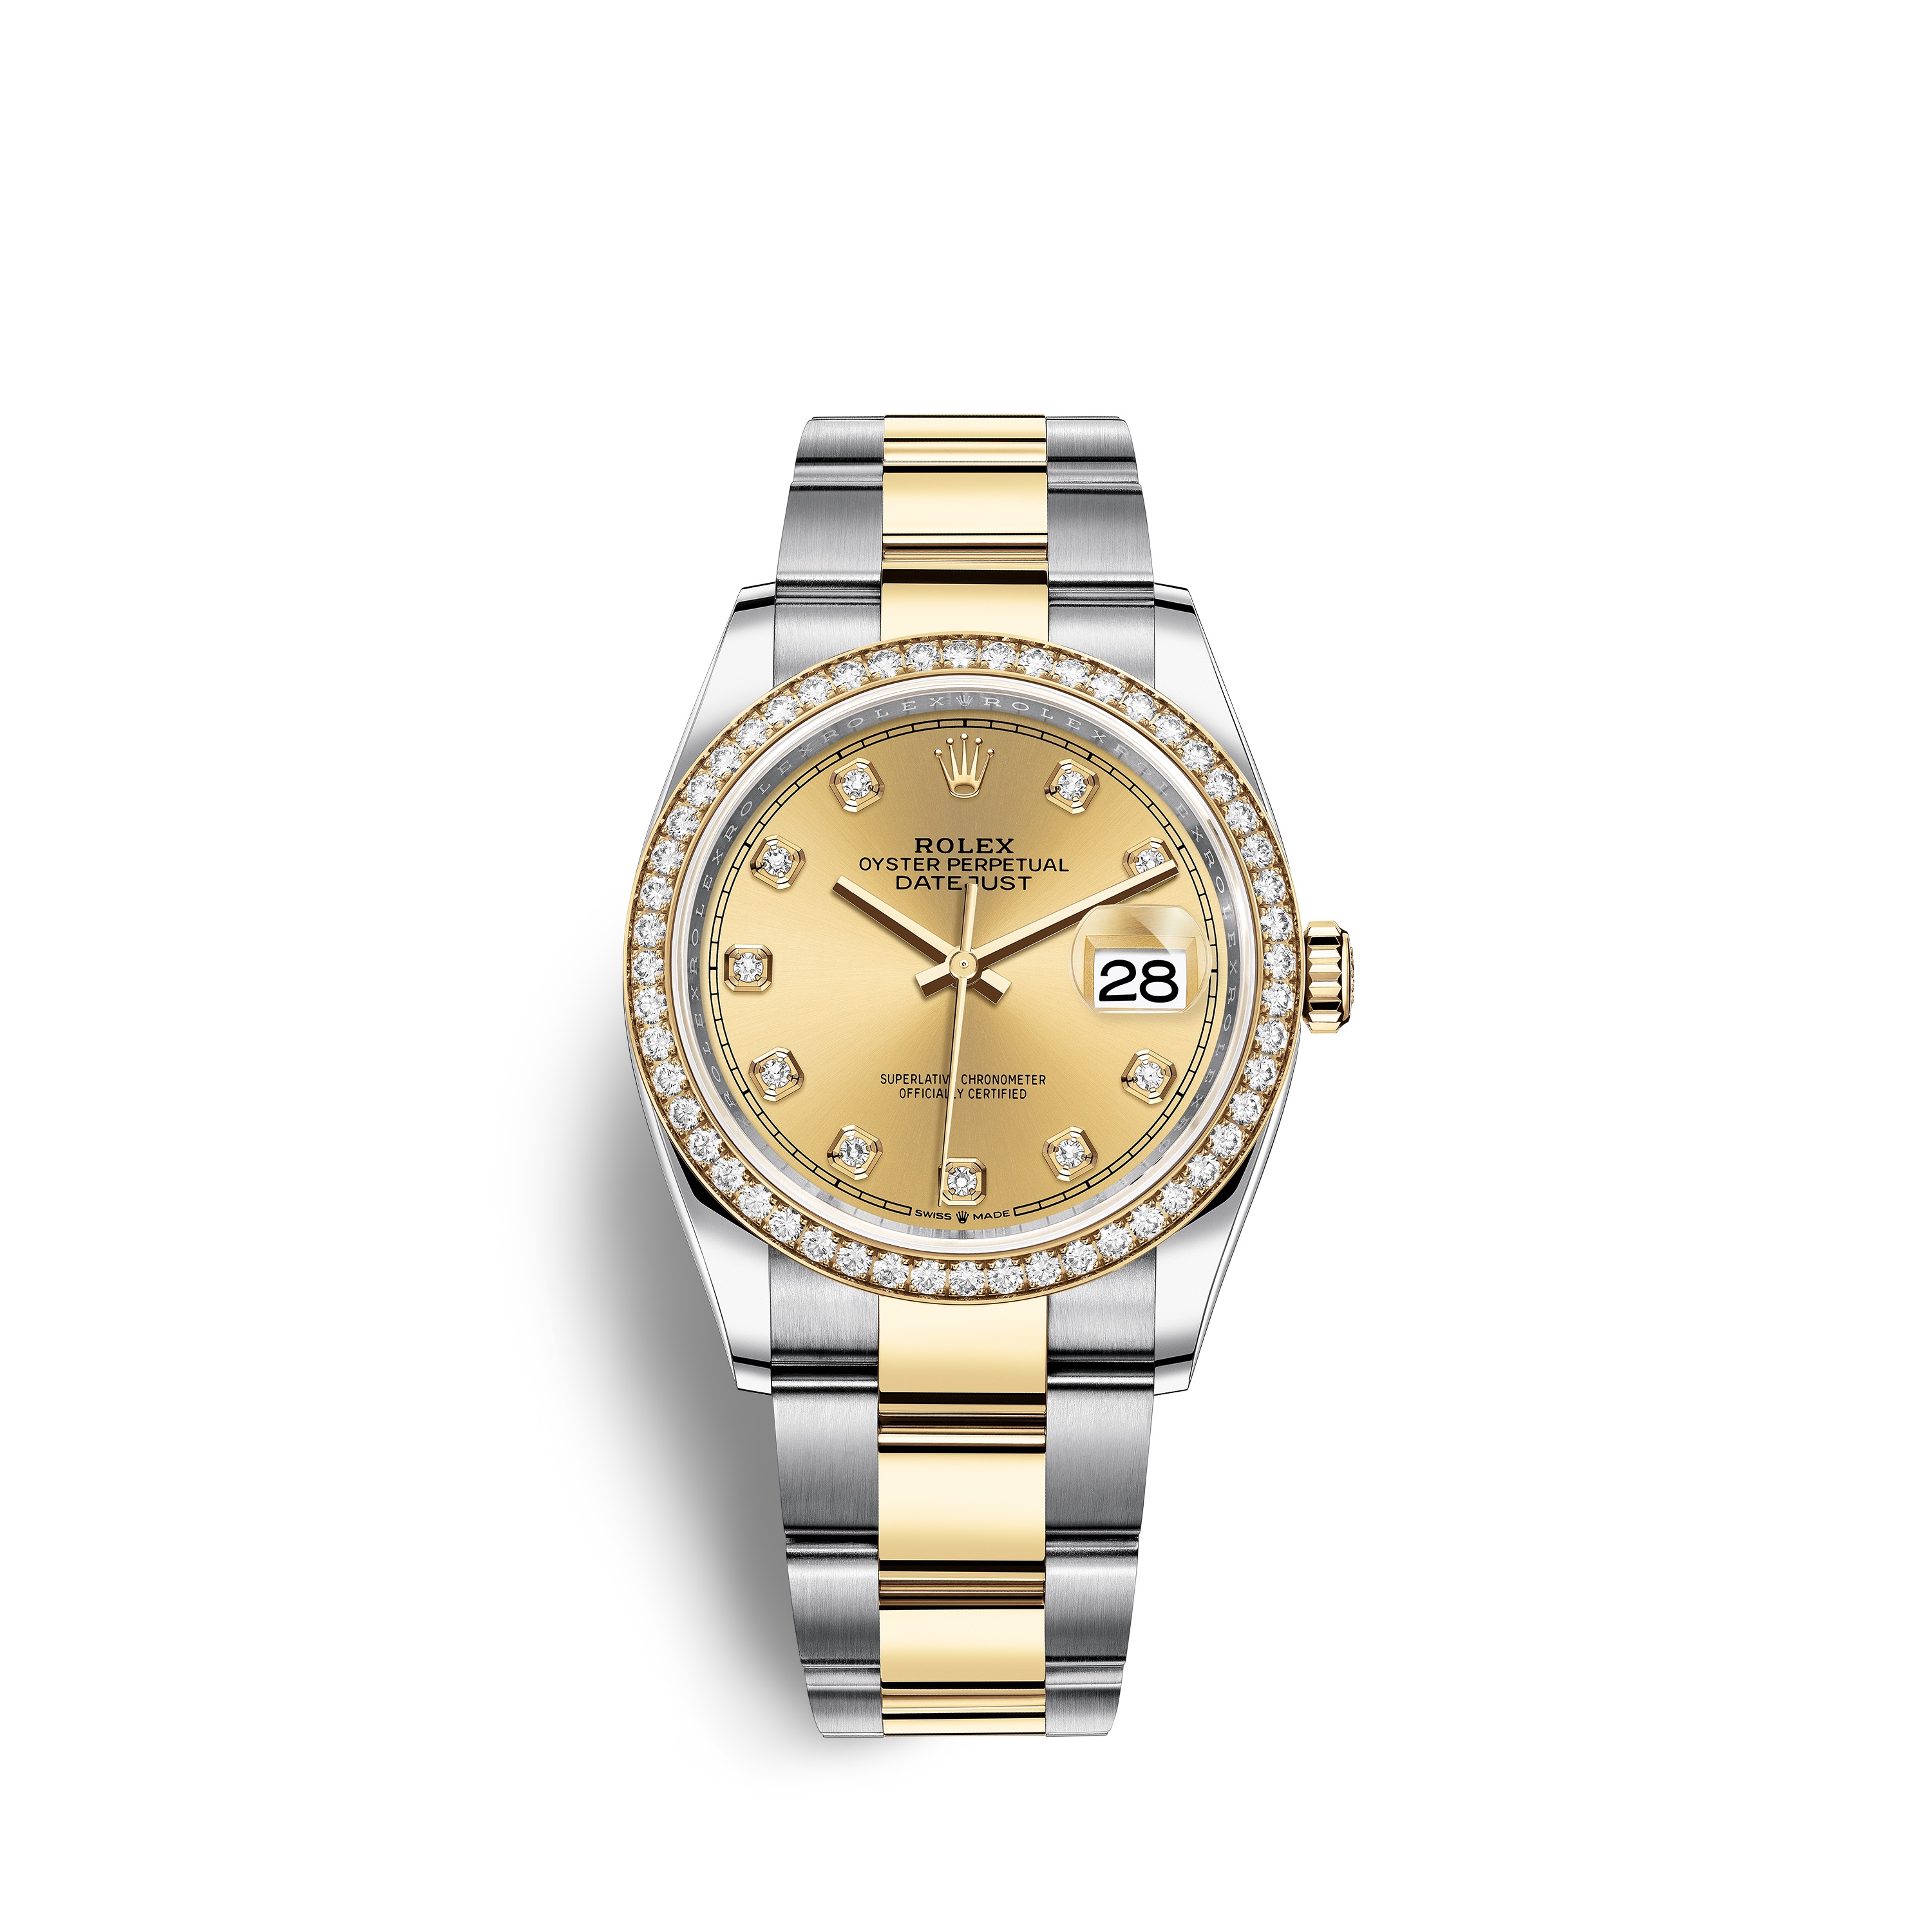 Datejust 36 126283RBR Gold & Stainless Steel Watch (Champagne-Colour Set with Diamonds)